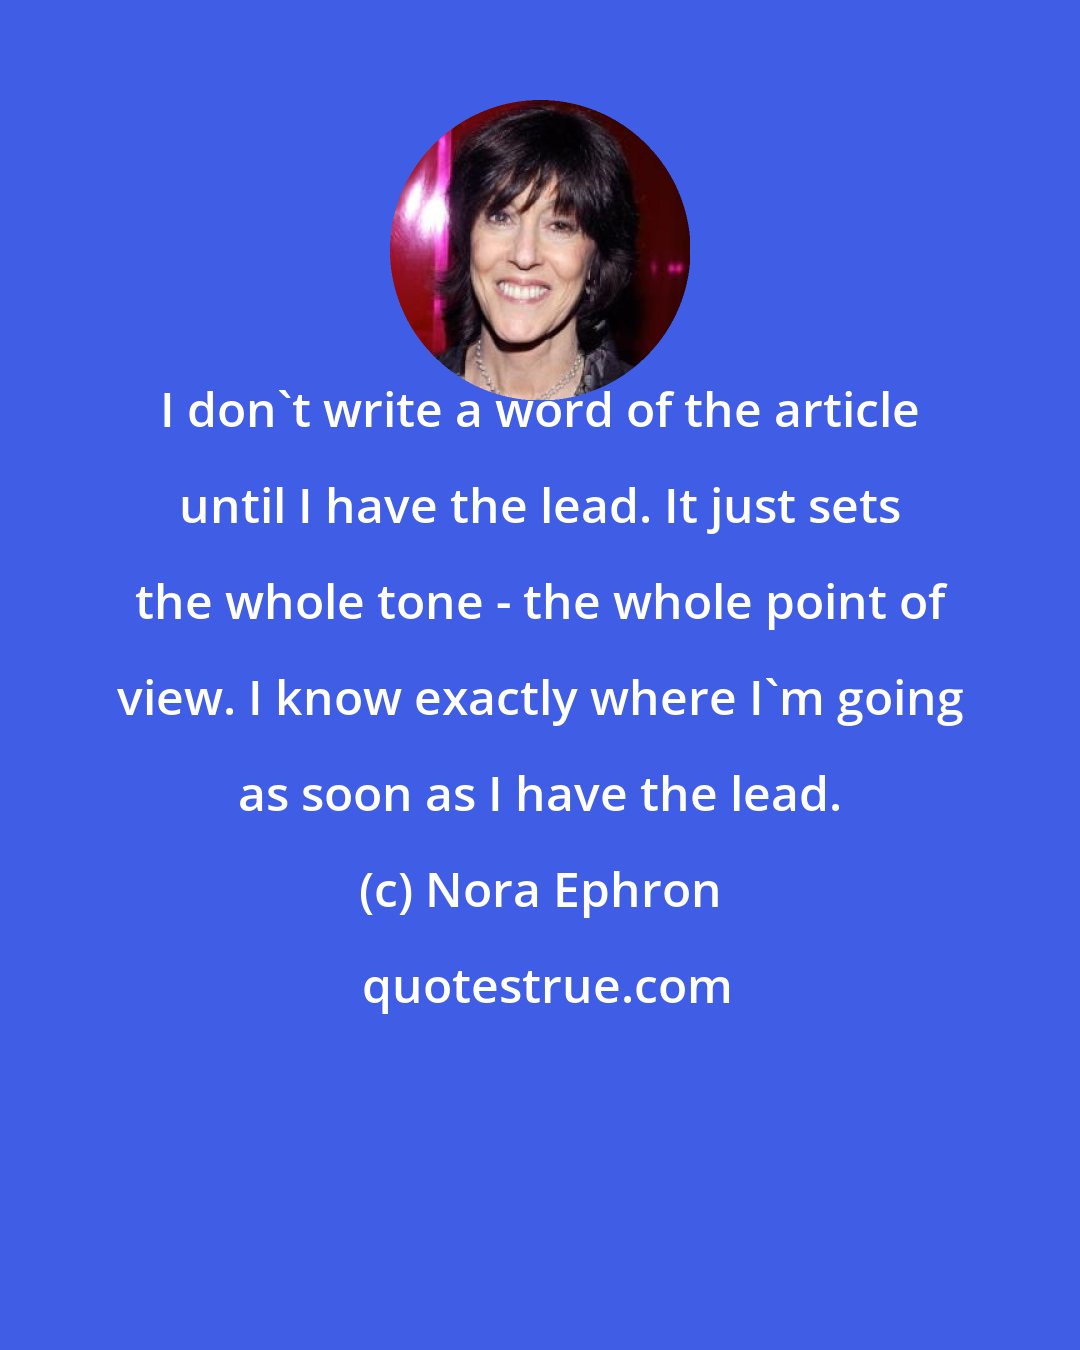 Nora Ephron: I don't write a word of the article until I have the lead. It just sets the whole tone - the whole point of view. I know exactly where I'm going as soon as I have the lead.